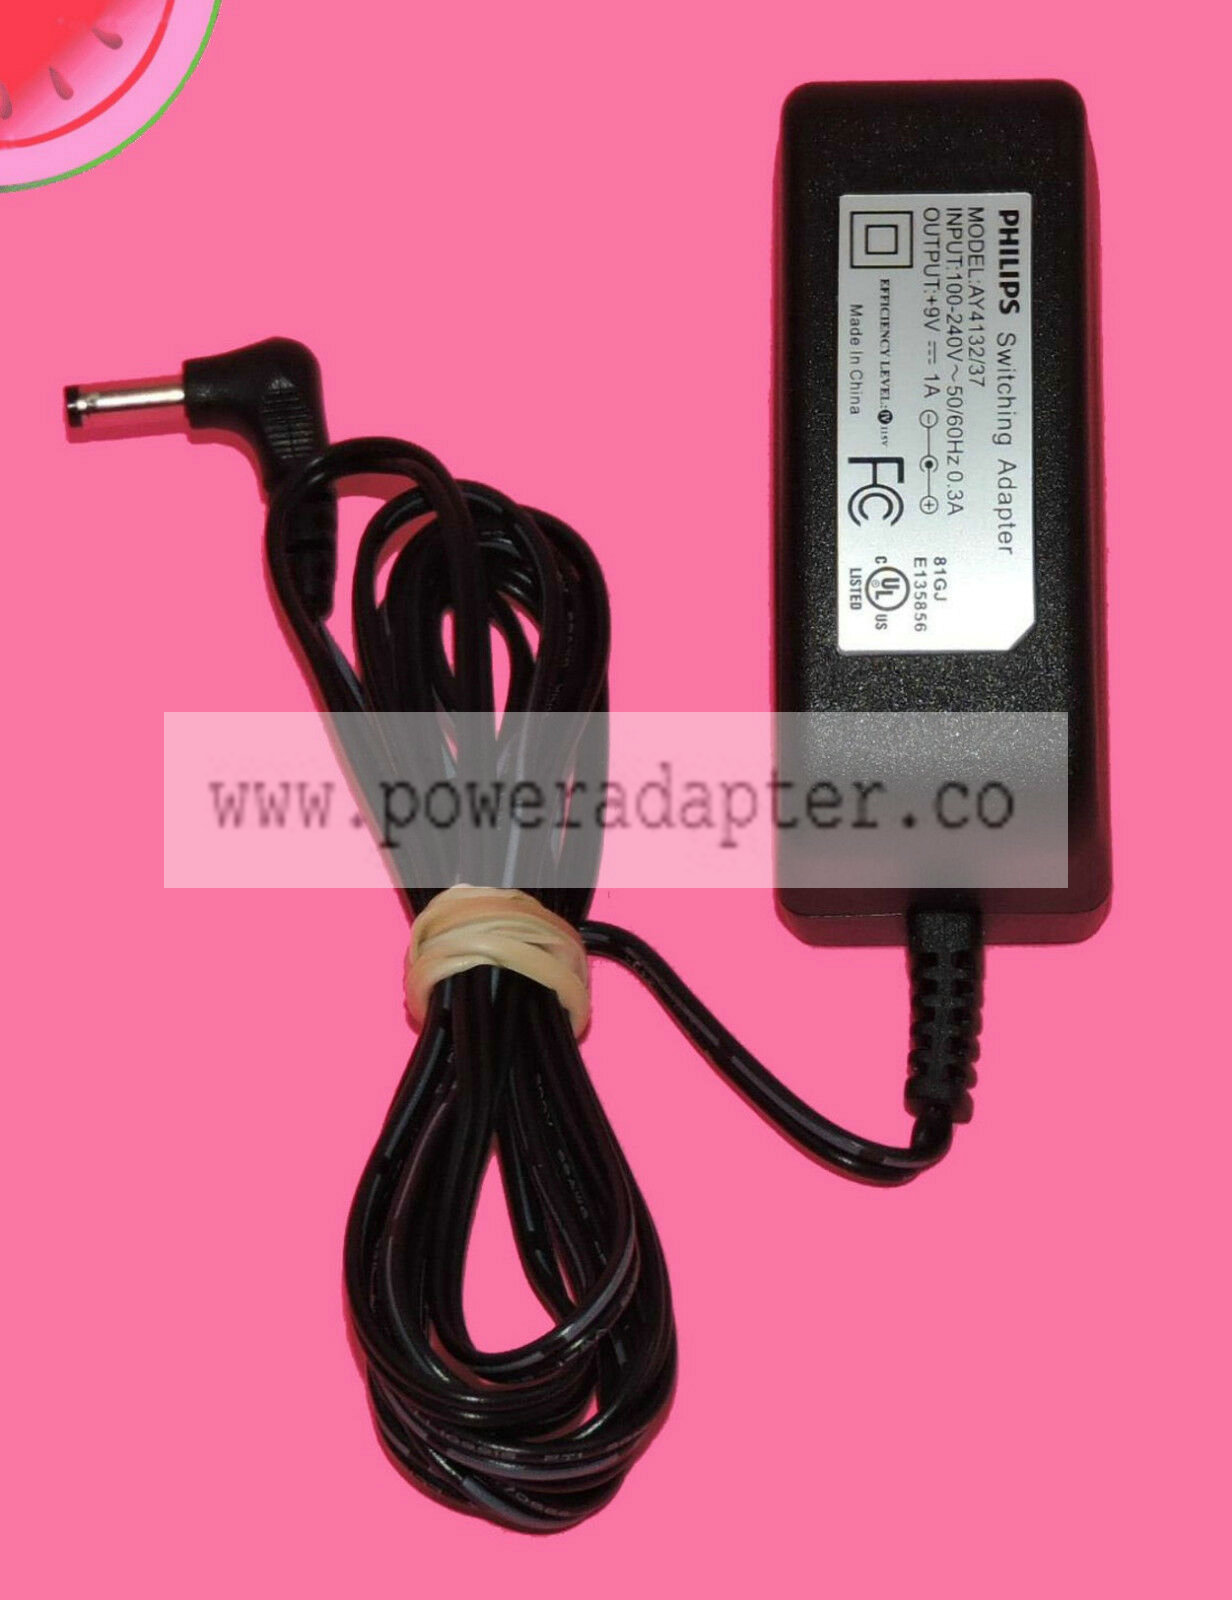 Power Supply Adapter Genuine PHILIPS AY4132/37 AC / DC 9v 1amp Model: AY4132/37 Brand: PHILIPS Output Voltage: 1amp